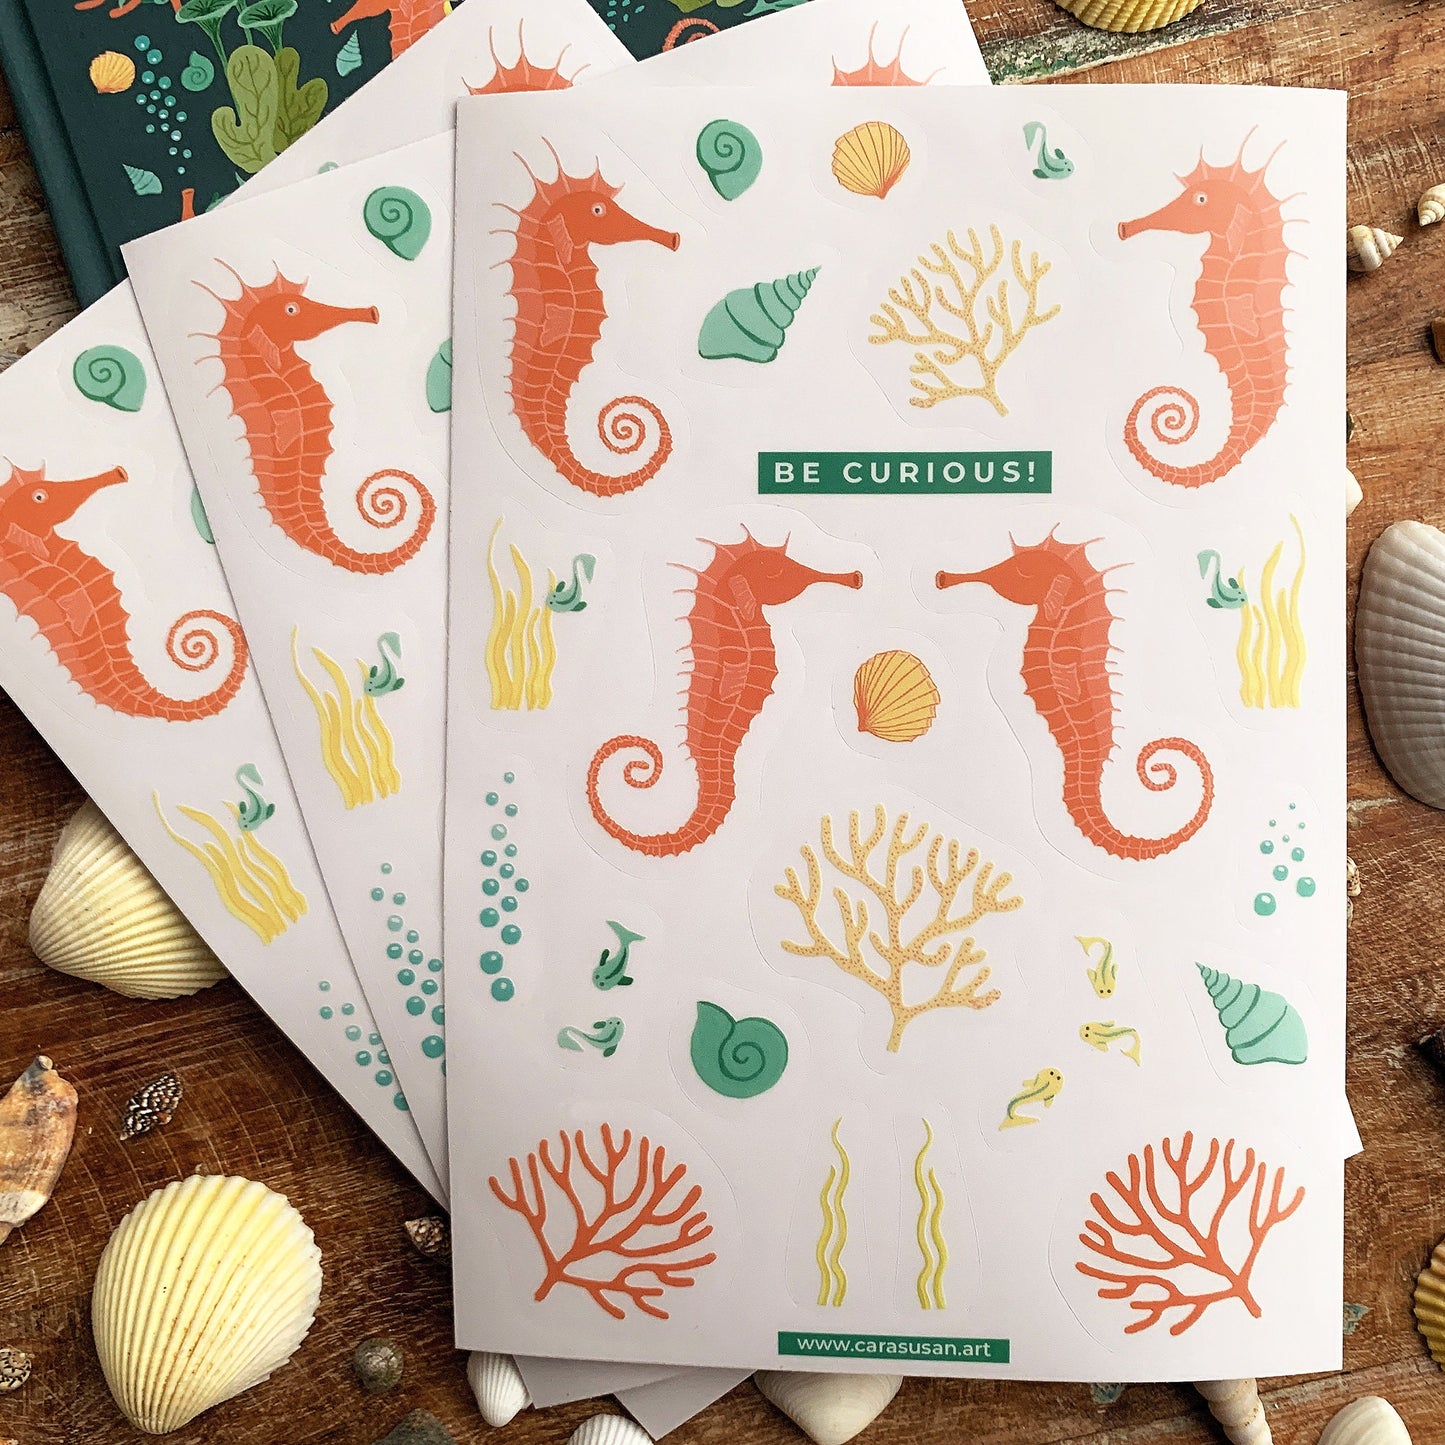 Bullet journal set "Seahorse" - Din A5 journal and 78 matching stickers